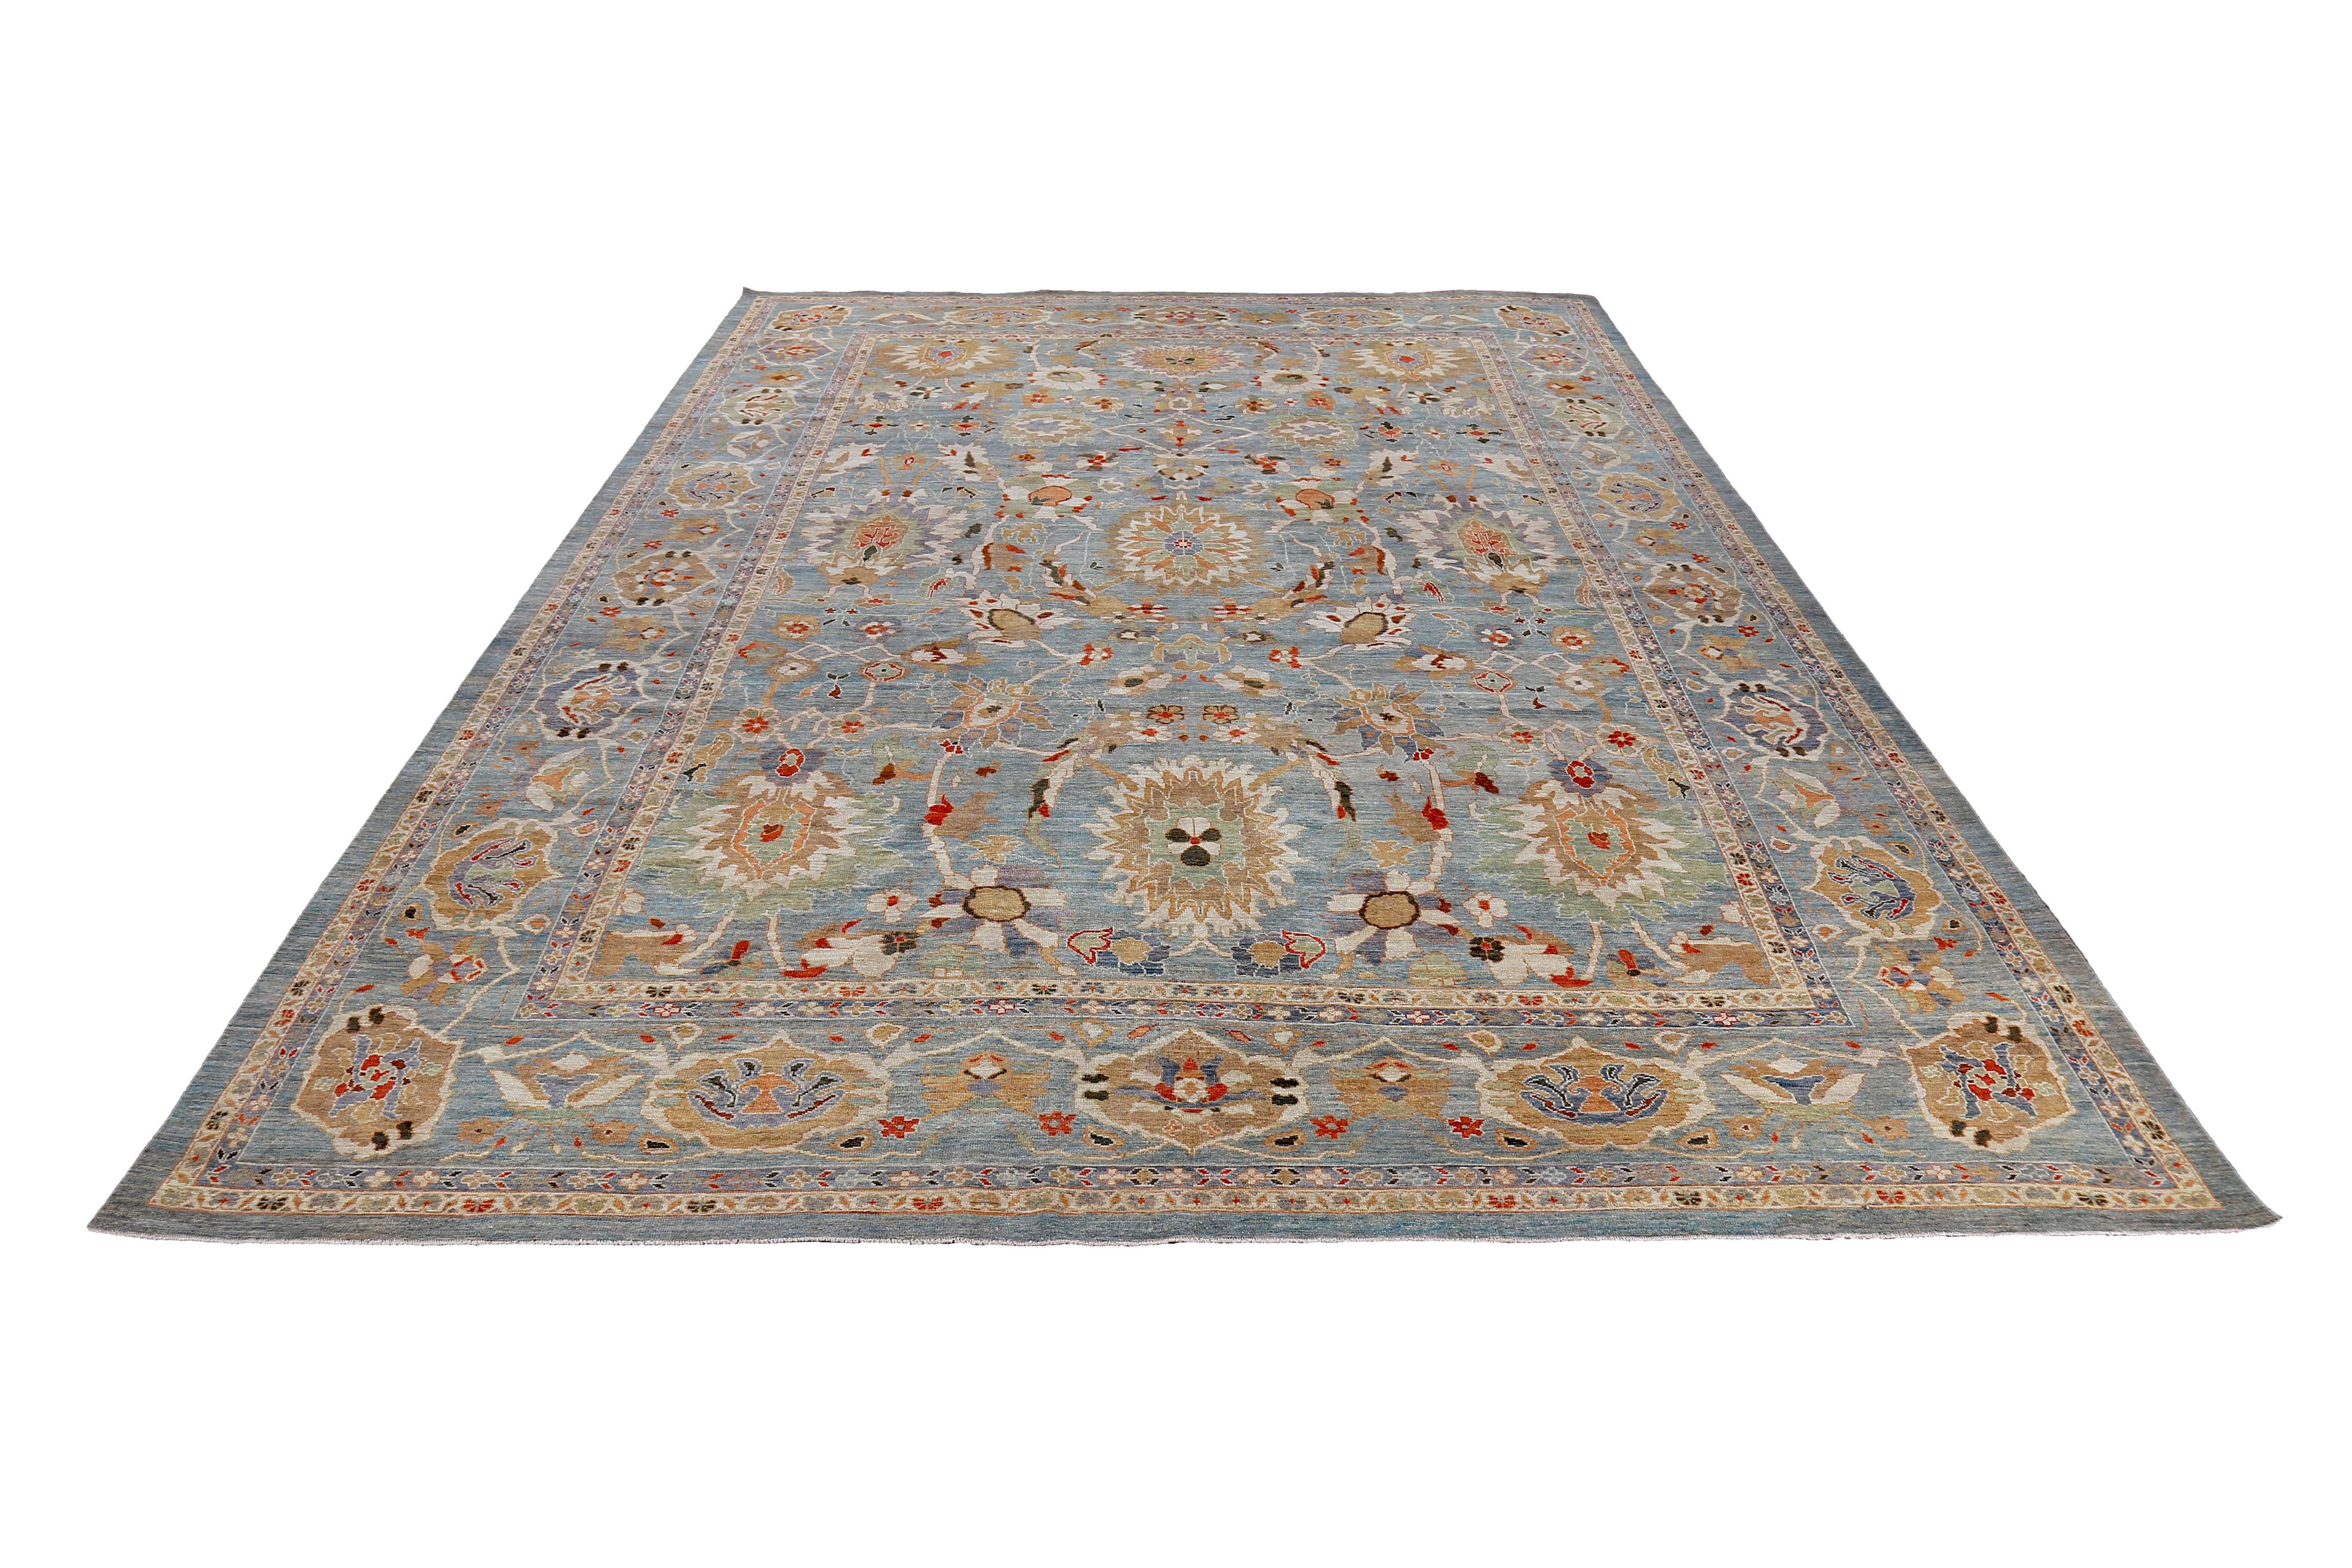 New handmade Turkish area runner rug from high quality sheep’s wool and colored with eco-friendly vegetable dyes that are proven safe for humans and pets alike. It’s a Classic Sultanabad design showcasing a regal blue field with prominent Herati